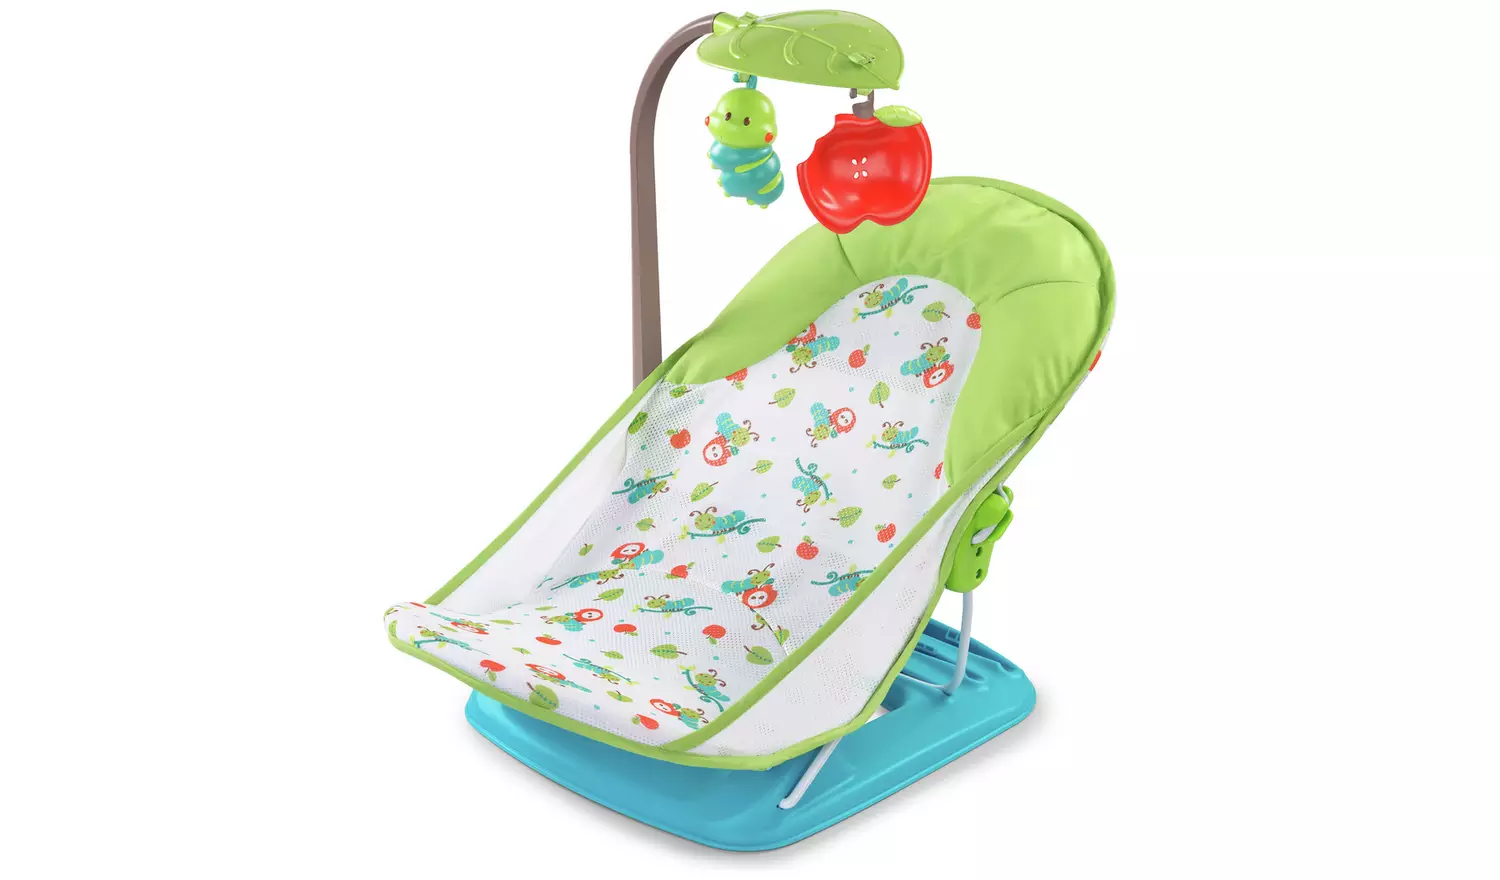 Summer Infant Deluxe Bather with Toy Bar